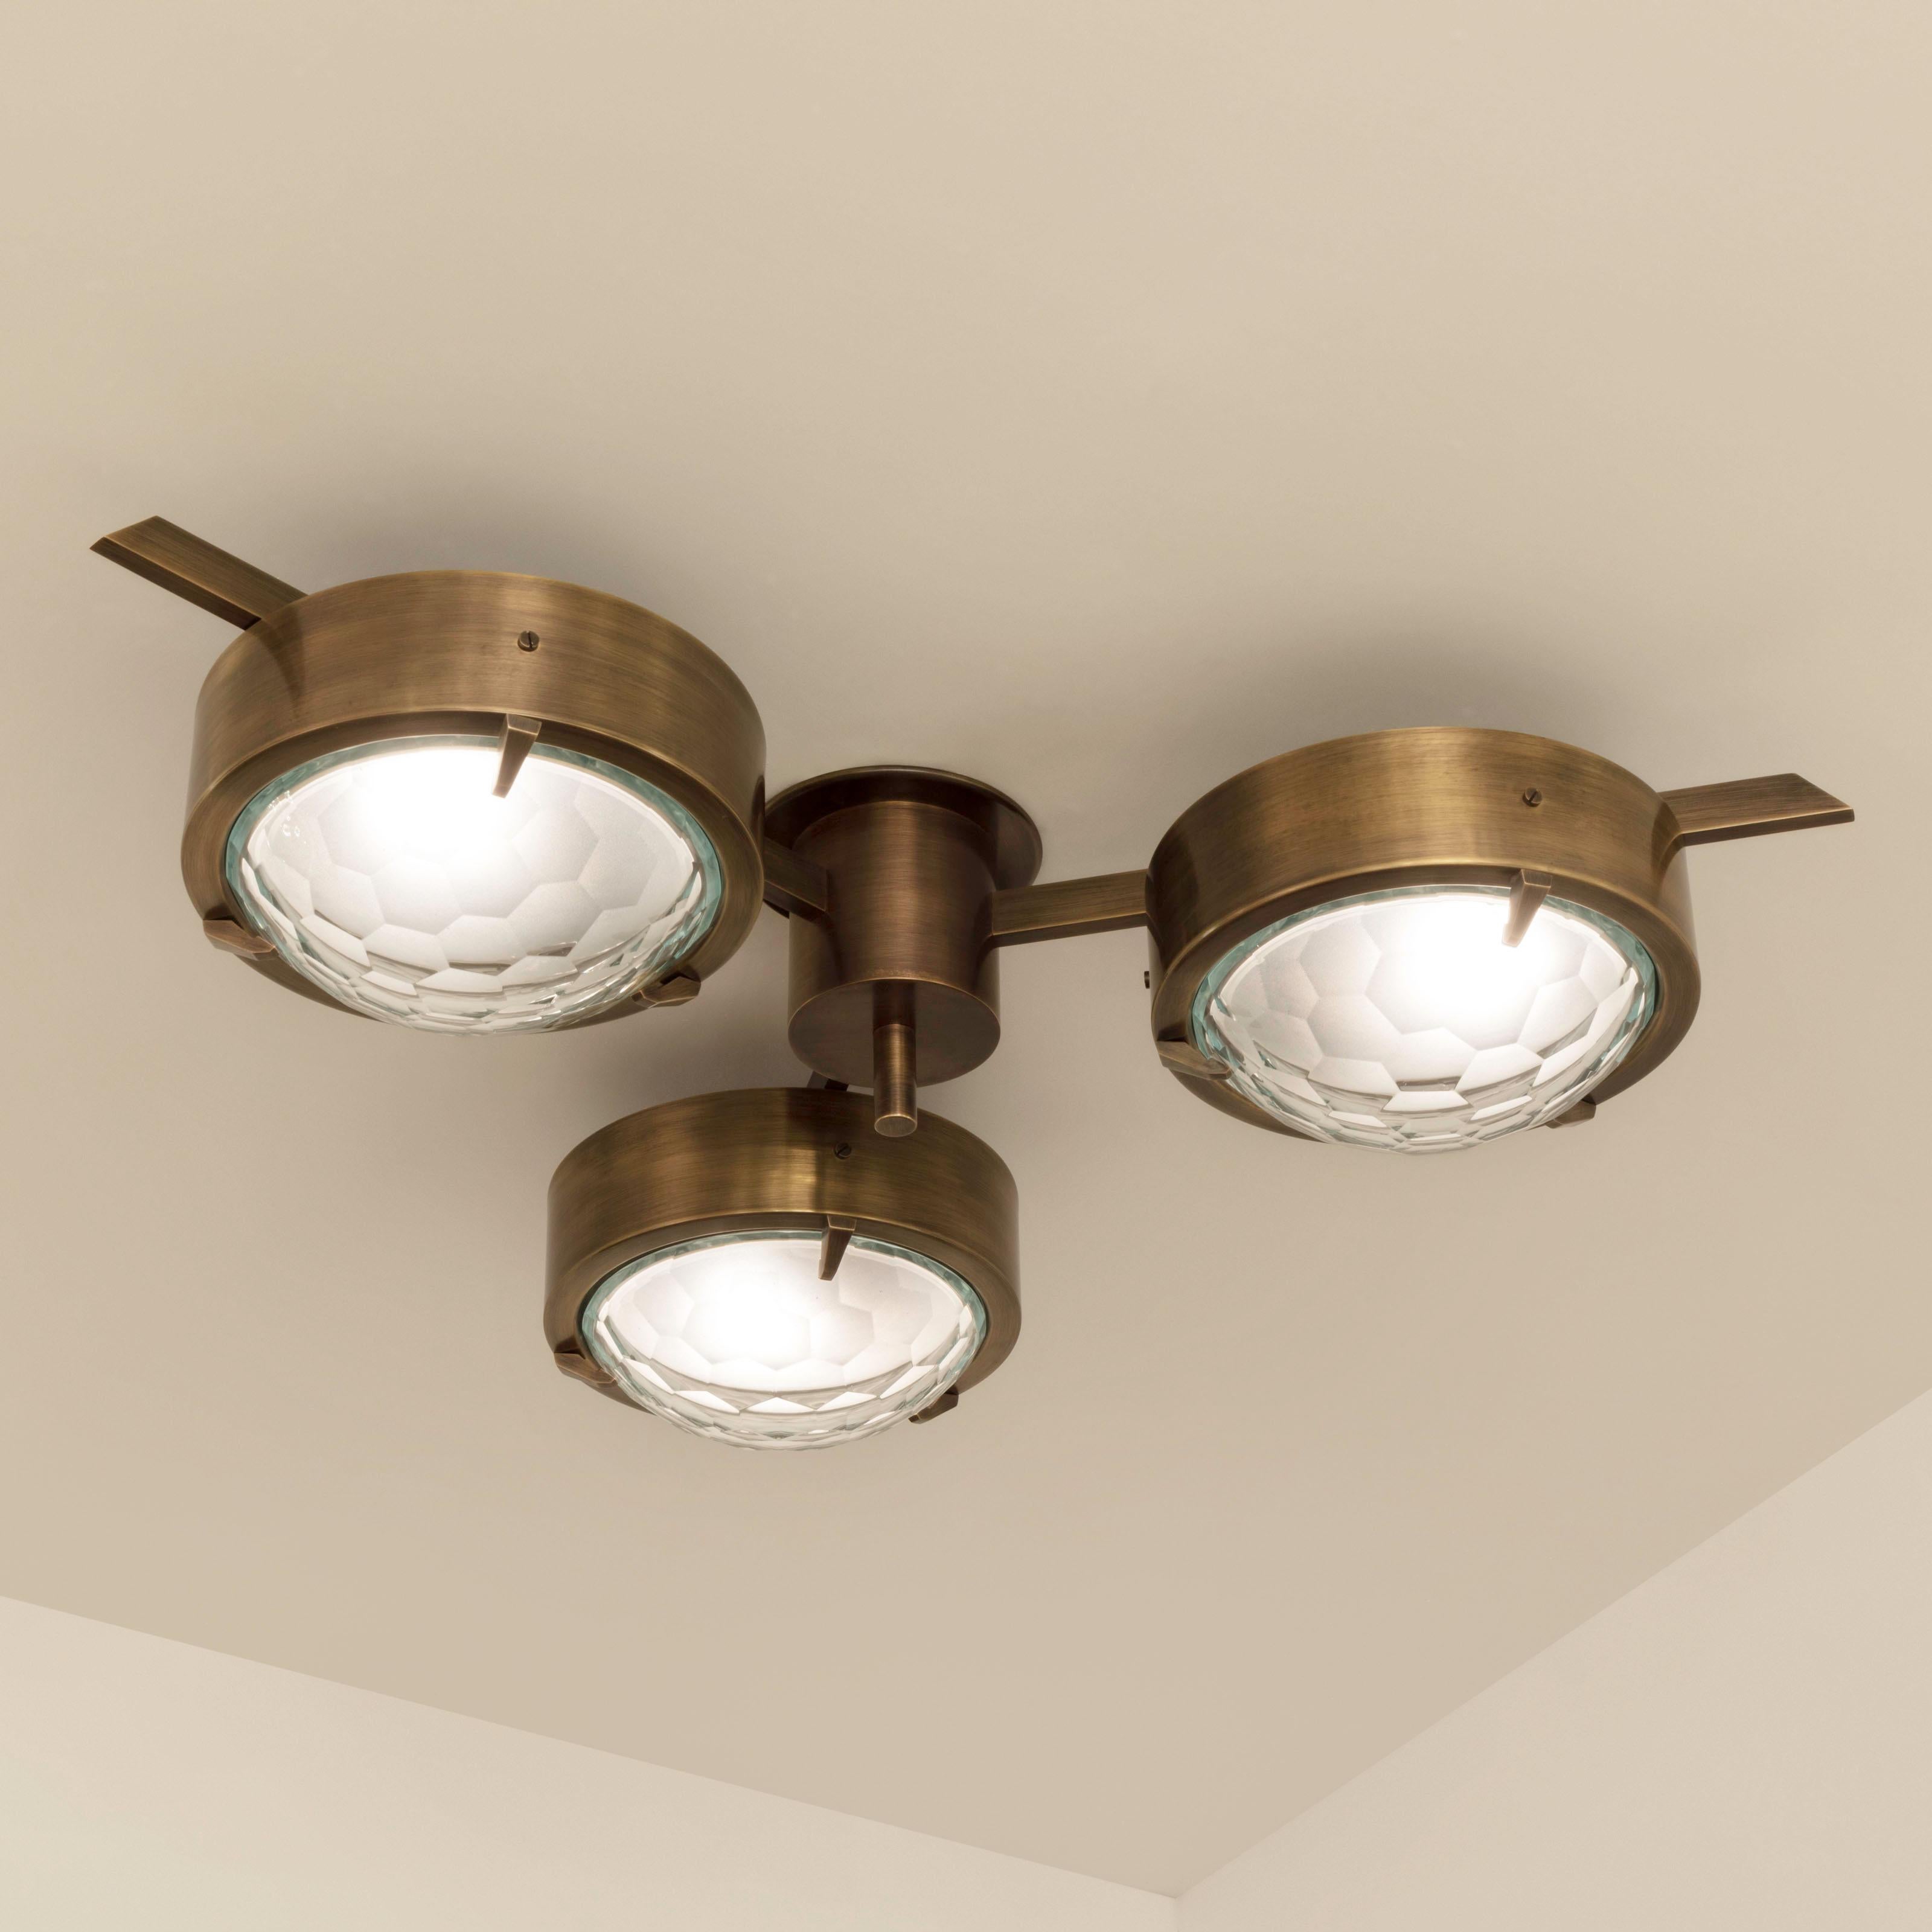 The Smeraldo ceiling light features three shades hand faceted from thick starphire glass, balanced on a brass machined frame. Shown as a flush mount in our bronzo ottone finish. Listed price is for the stock model in polished brass.

Customization